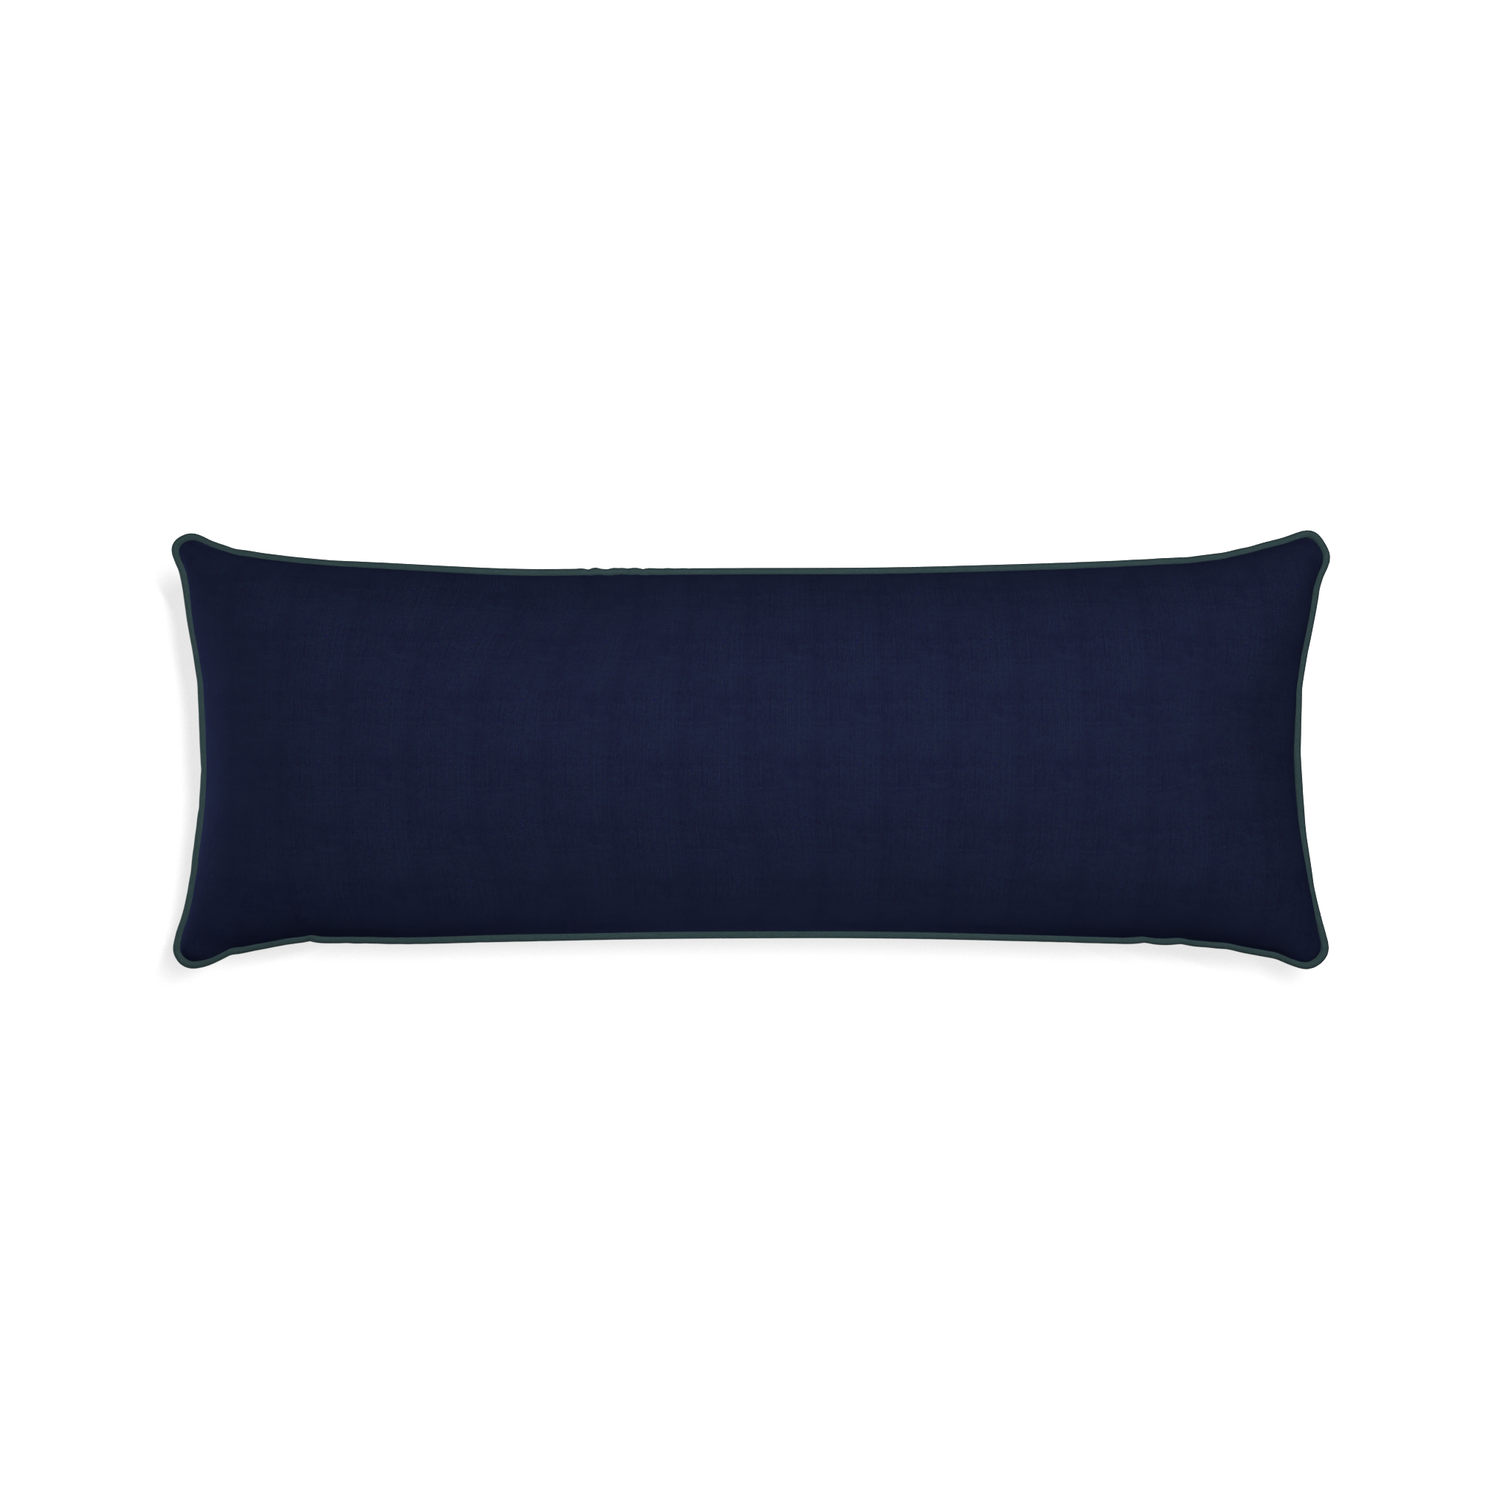 Xl-lumbar midnight custom navy bluepillow with p piping on white background